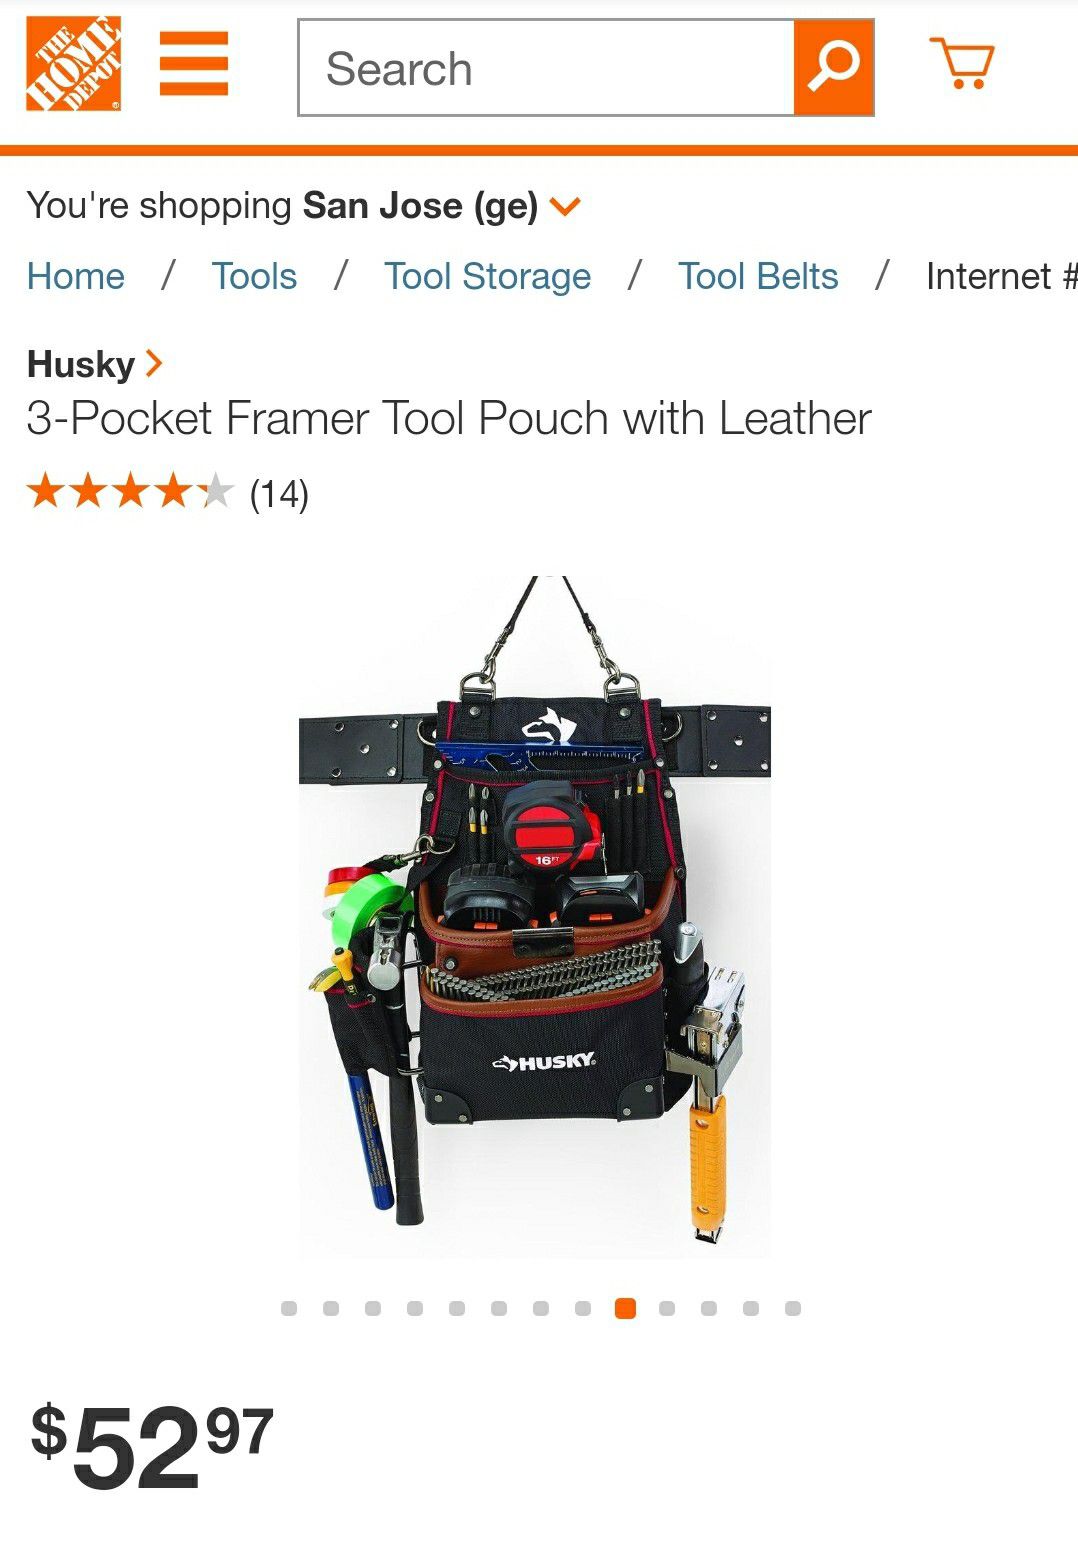 Husky 3-Pocket Framer Tool Pouch with Leather